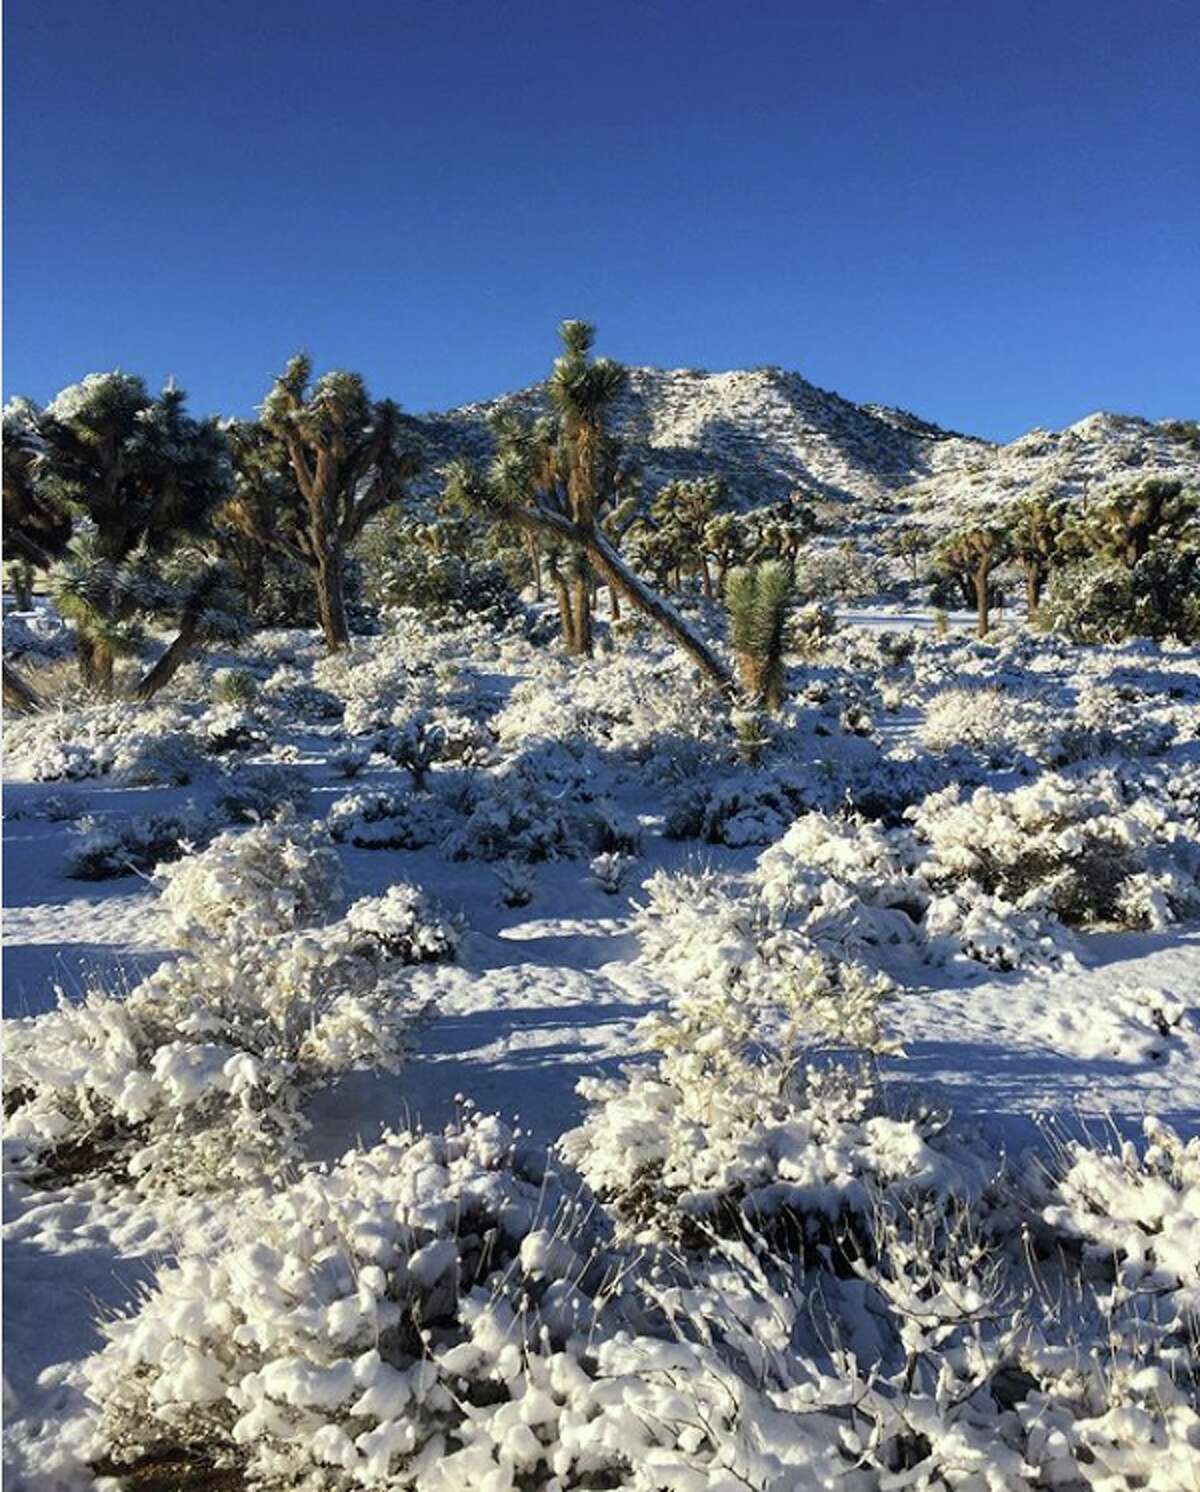 Joshua Tree dusted in rare snow, making an already otherworldly